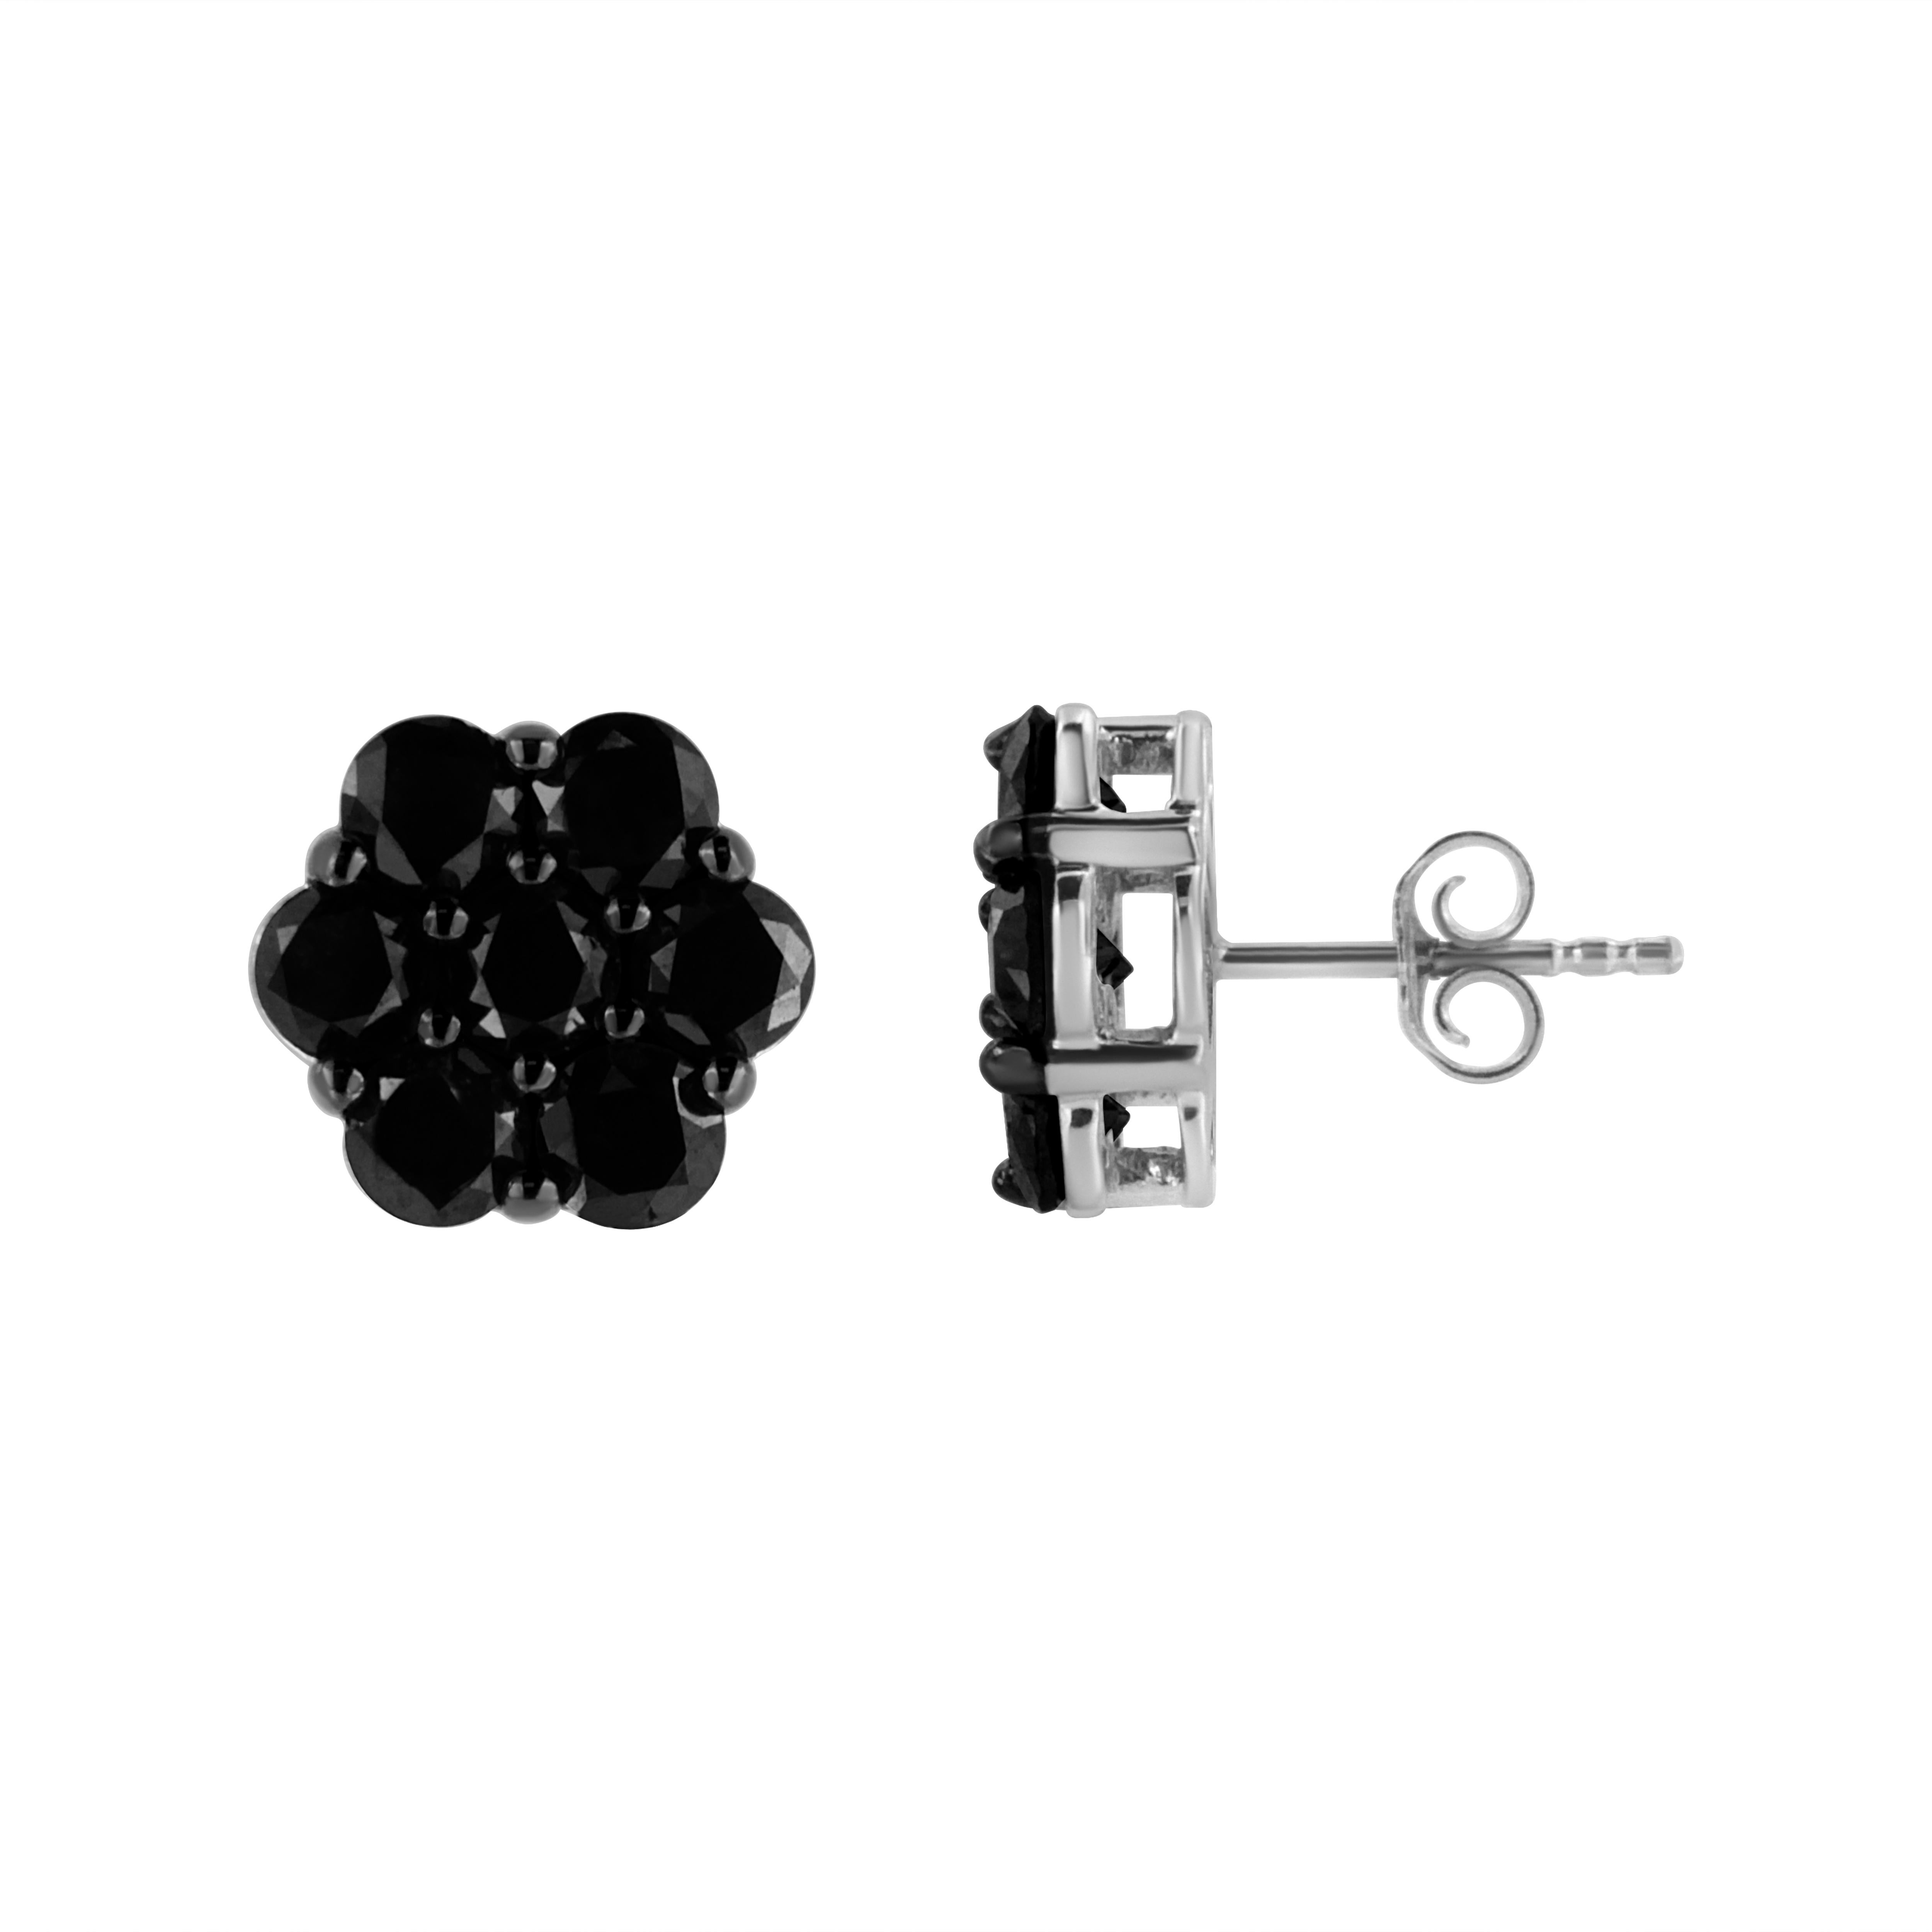 You will fall in love with these classic cluster stud earrings. A must have for any serious jewelry collection, these .925 sterling earrings boast an impressive 1.0 carat total weight of treated black	 diamonds with seven stones each. The earrings